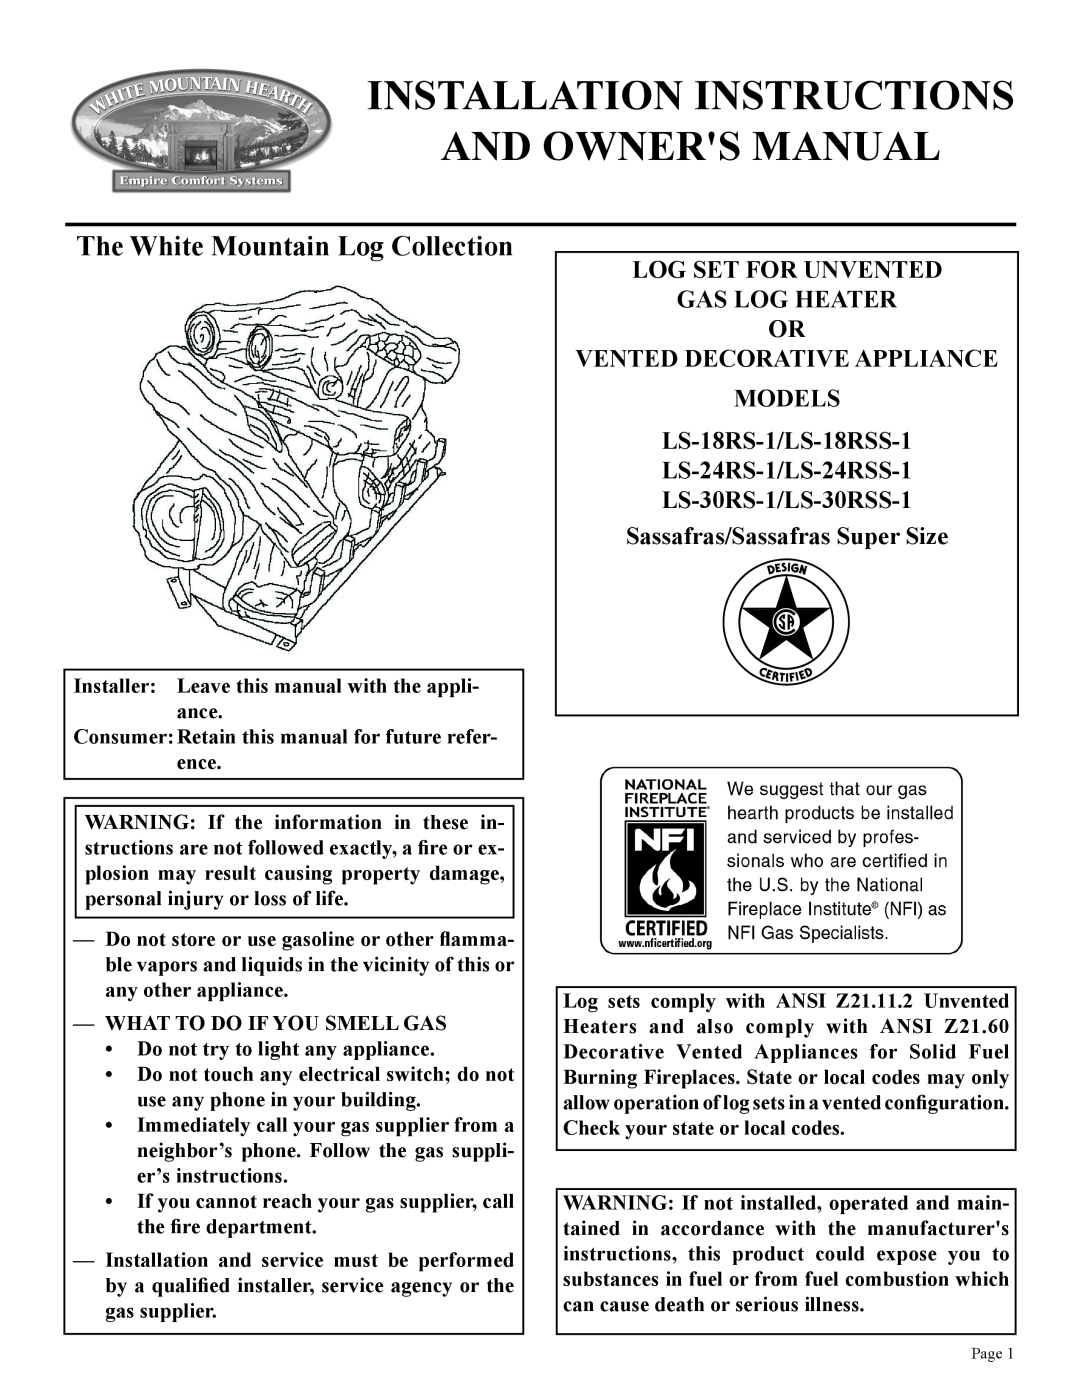 Empire Comfort Systems LS-18RS-1 installation instructions The White Mountain Log Collection, LS-30RS-1/LS-30RSS-1 